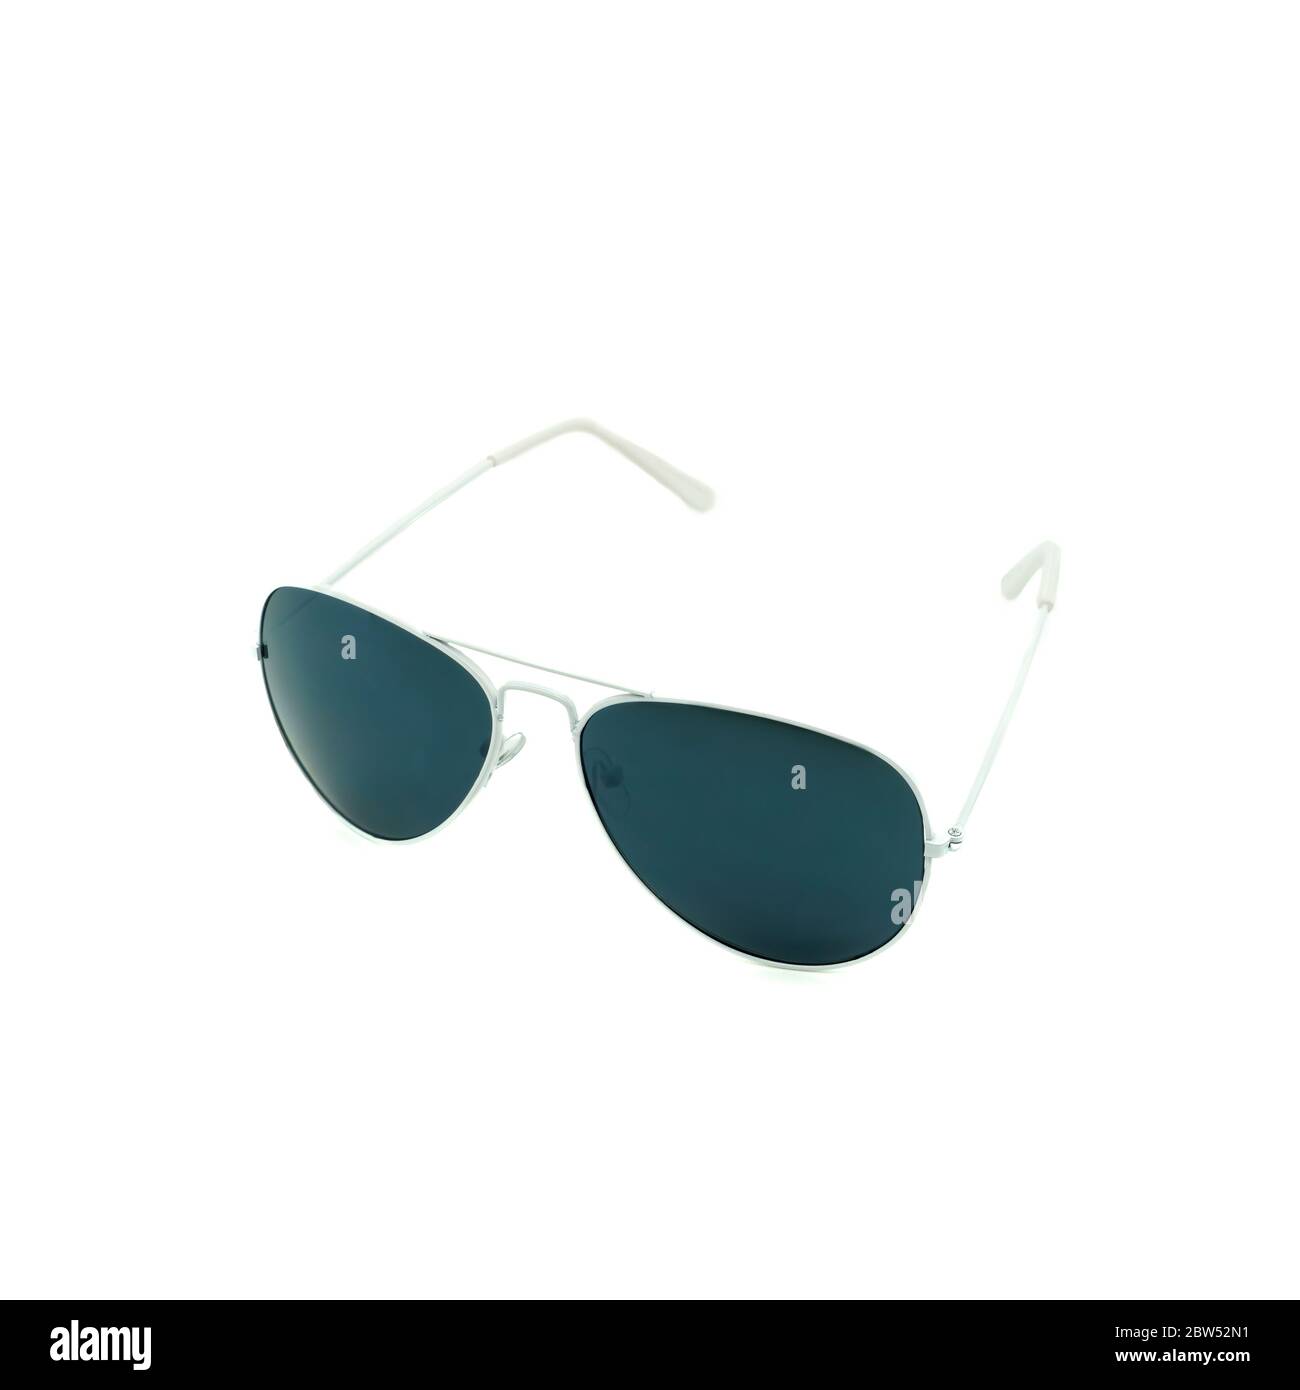 Blue mirrored sunglasses with a white frame, white background Stock Photo